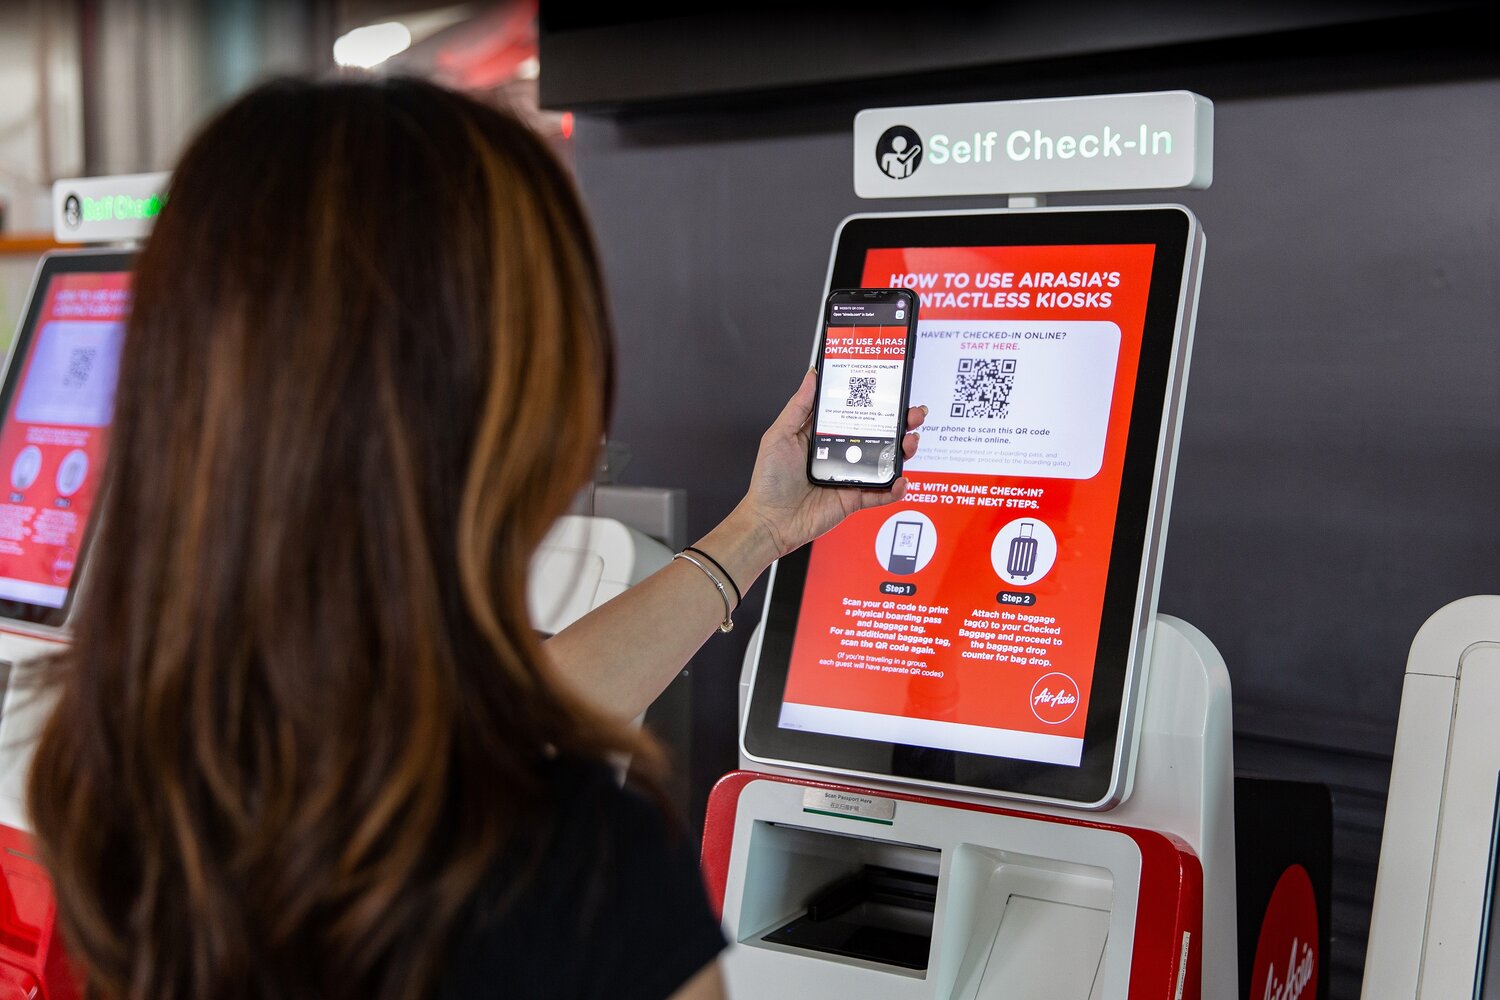 AirAsia enhances digital self check-in as part of safety procedures prior  to resumption of flights — airasia newsroom